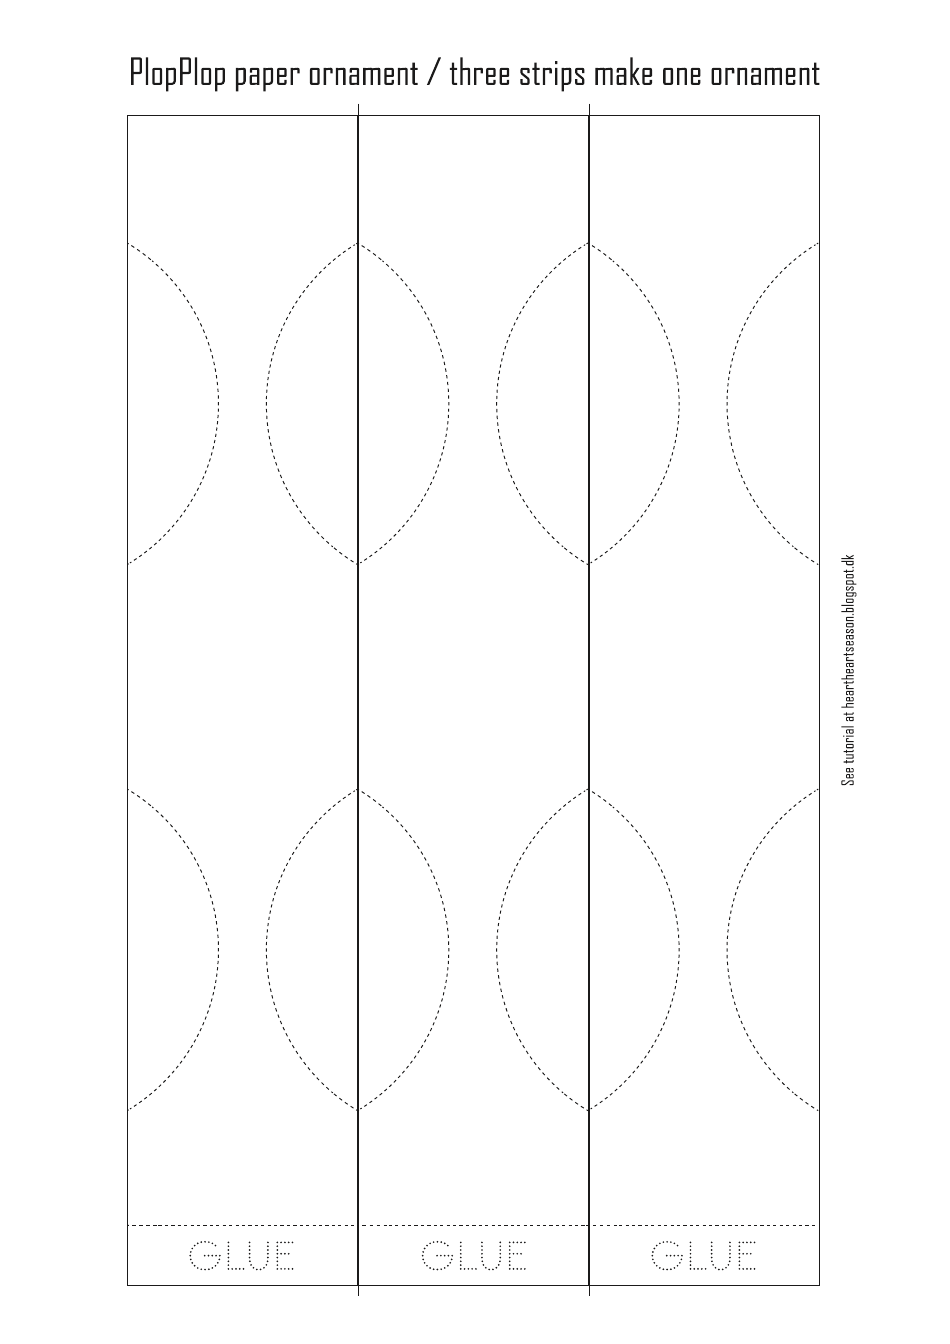 Blank Plopplop Paper Ornament Template, Page 1